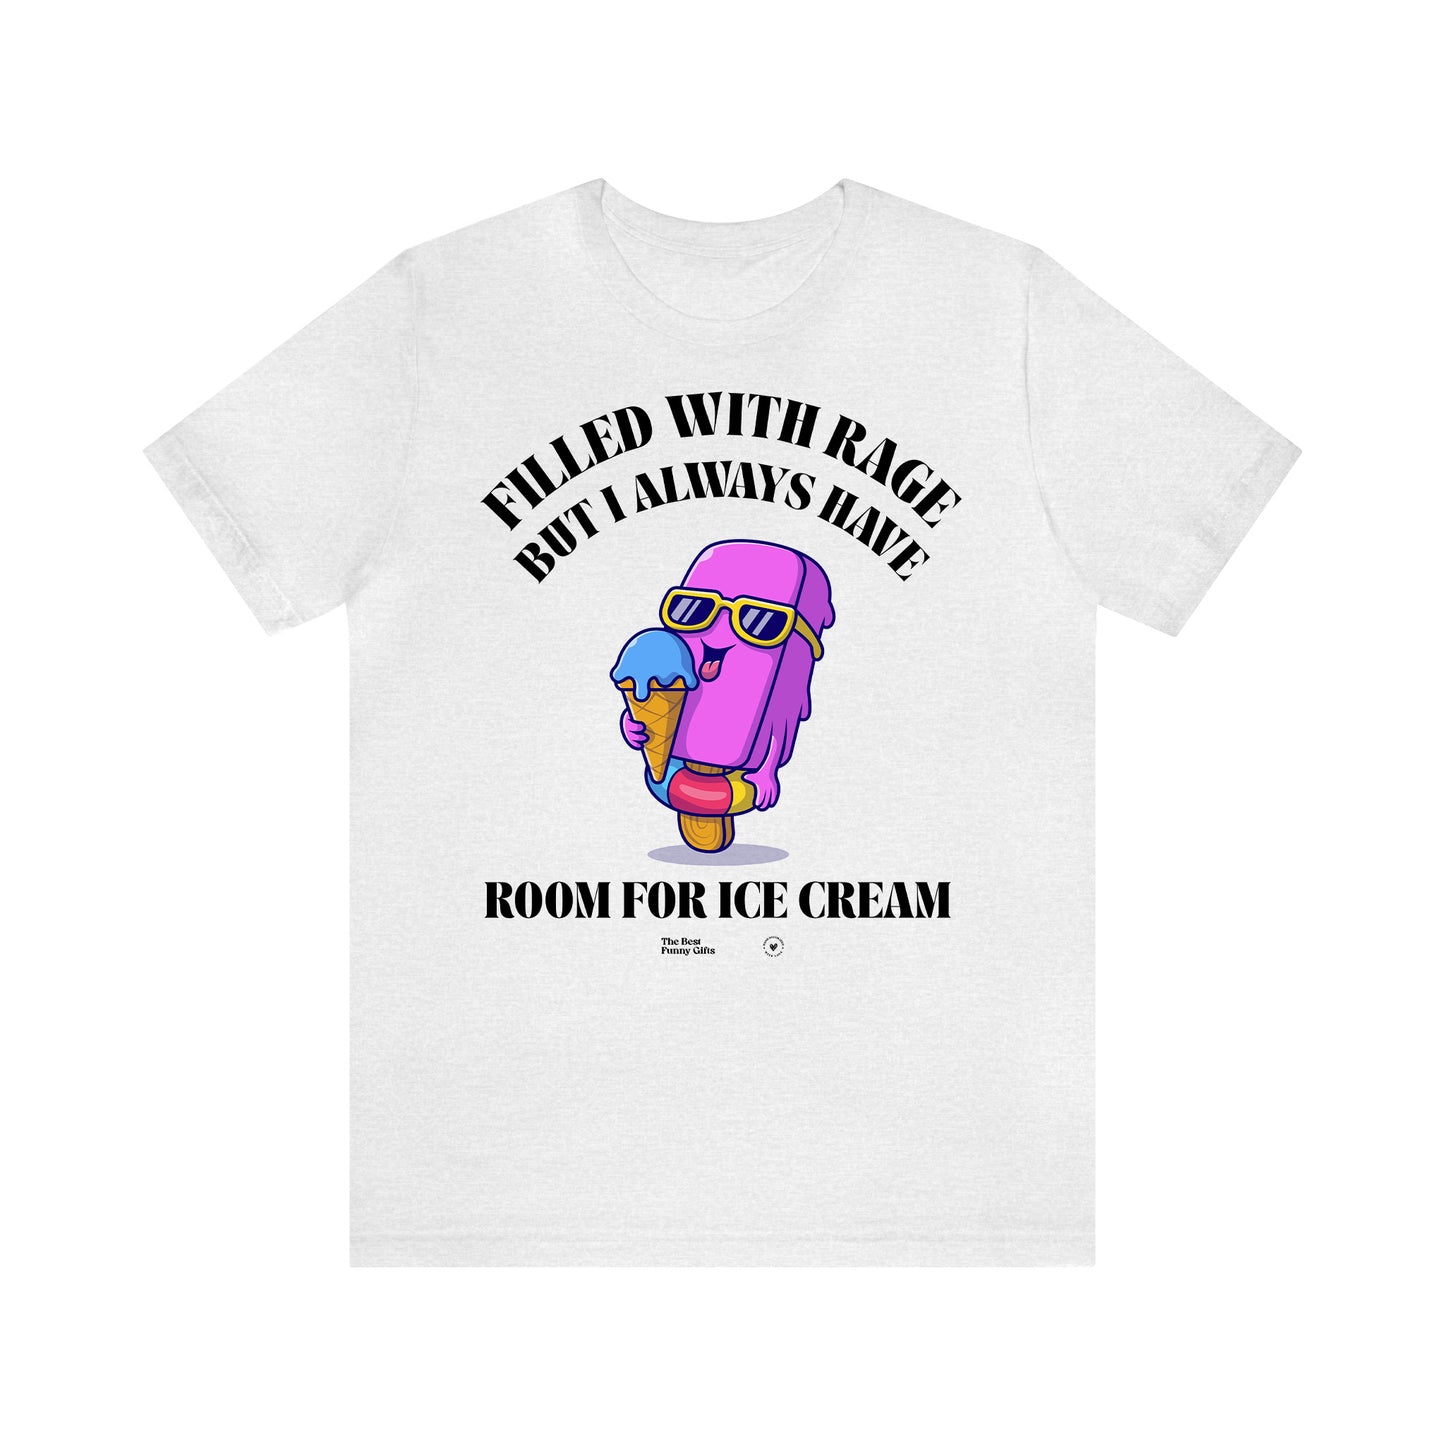 Funny Shirts for Women - Filled With Rage but I Always Have Room for Ice Cream - Women’s T Shirts